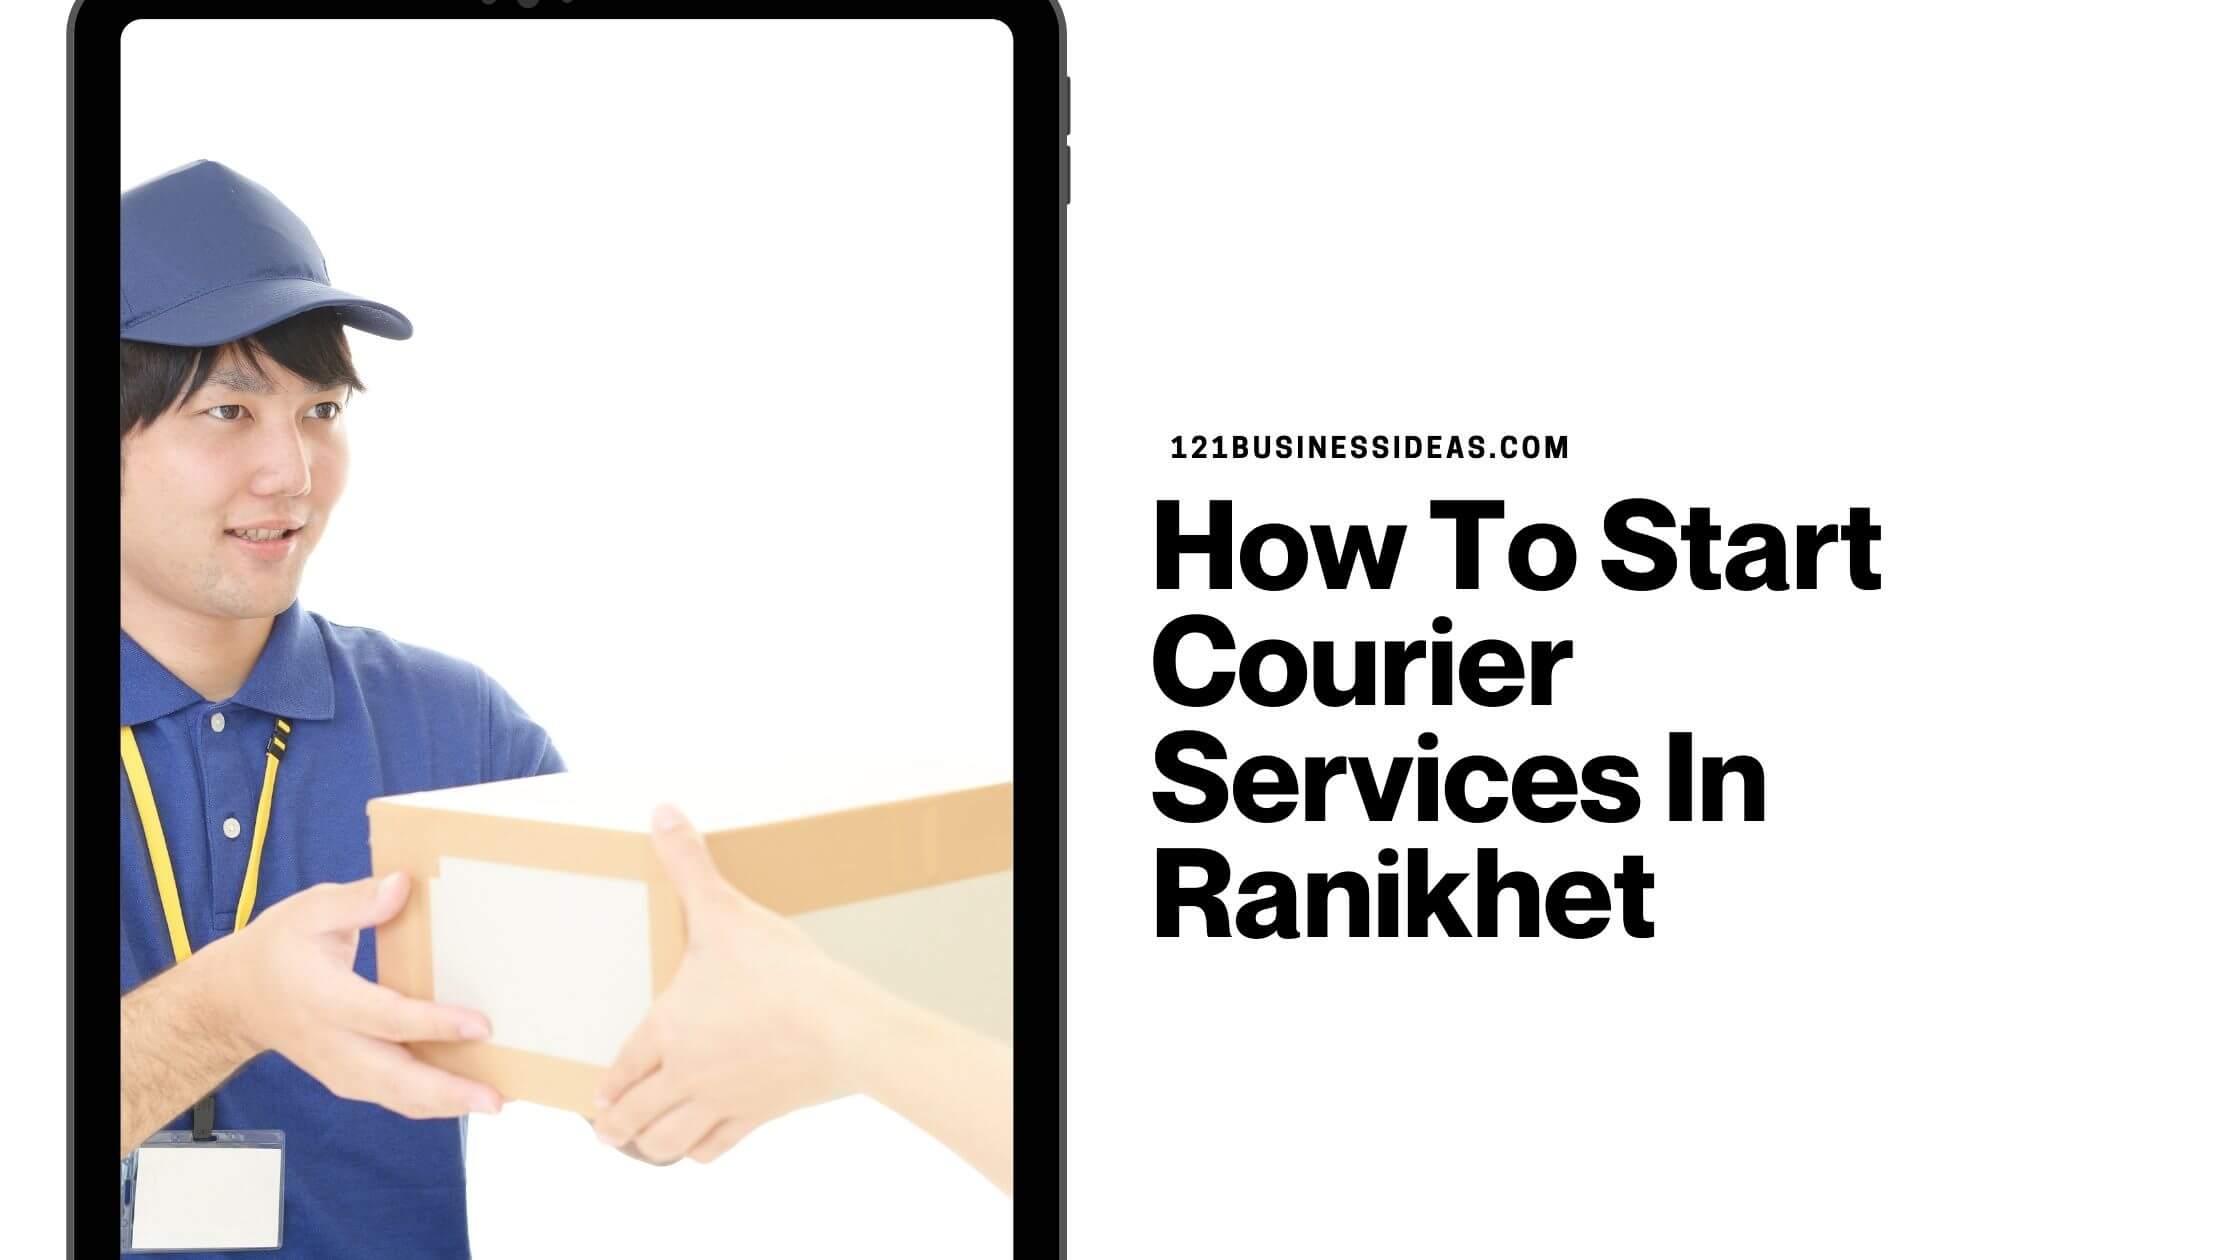 How To Start Courier Services In Ranikhet (2)